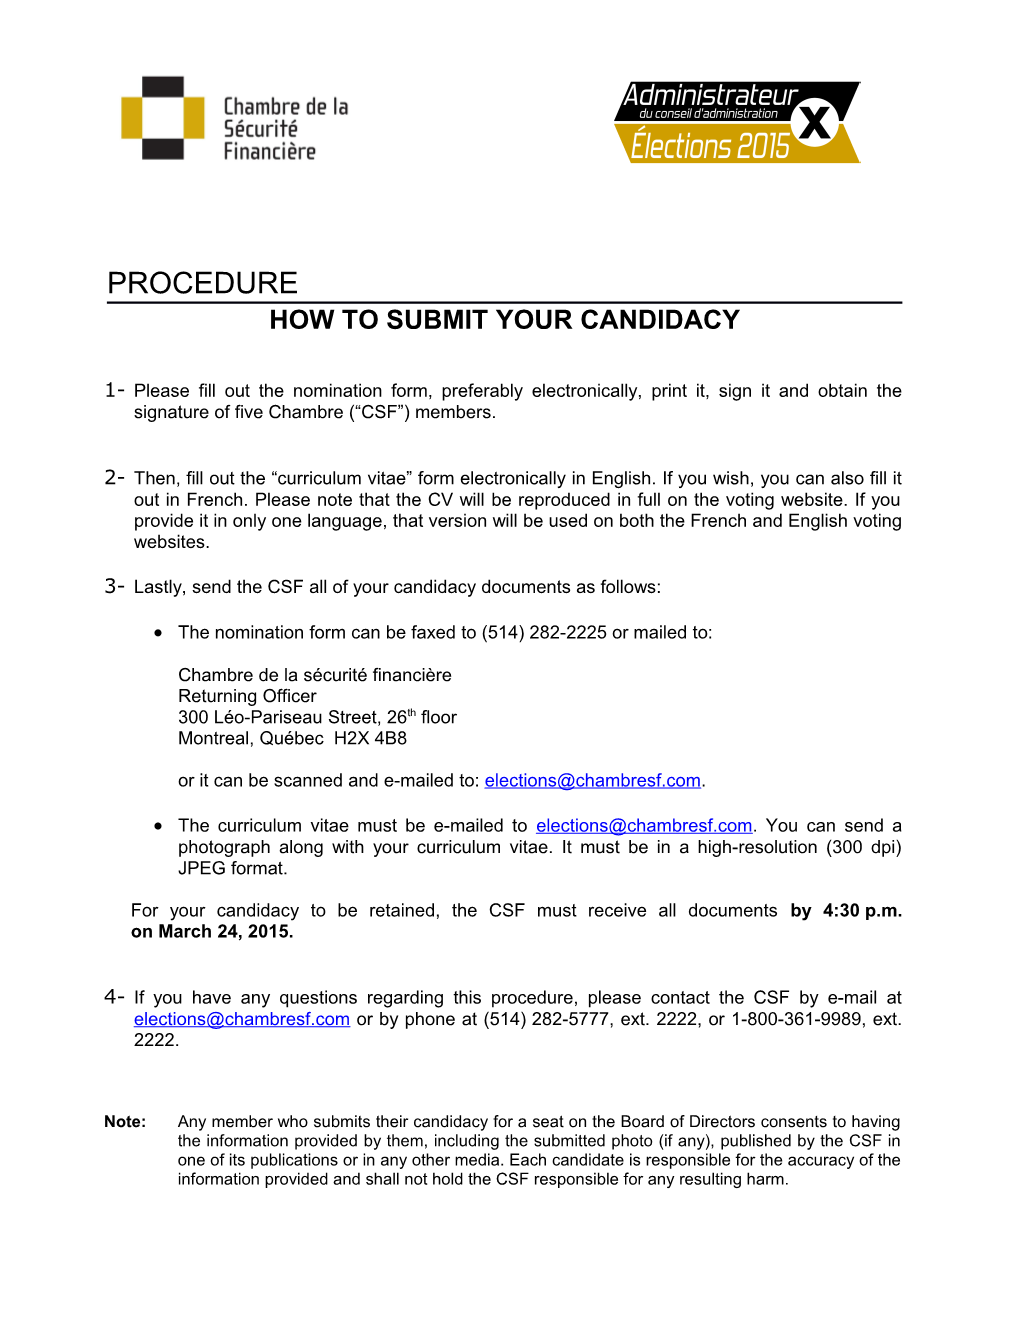 How to Submit Your Candidacy